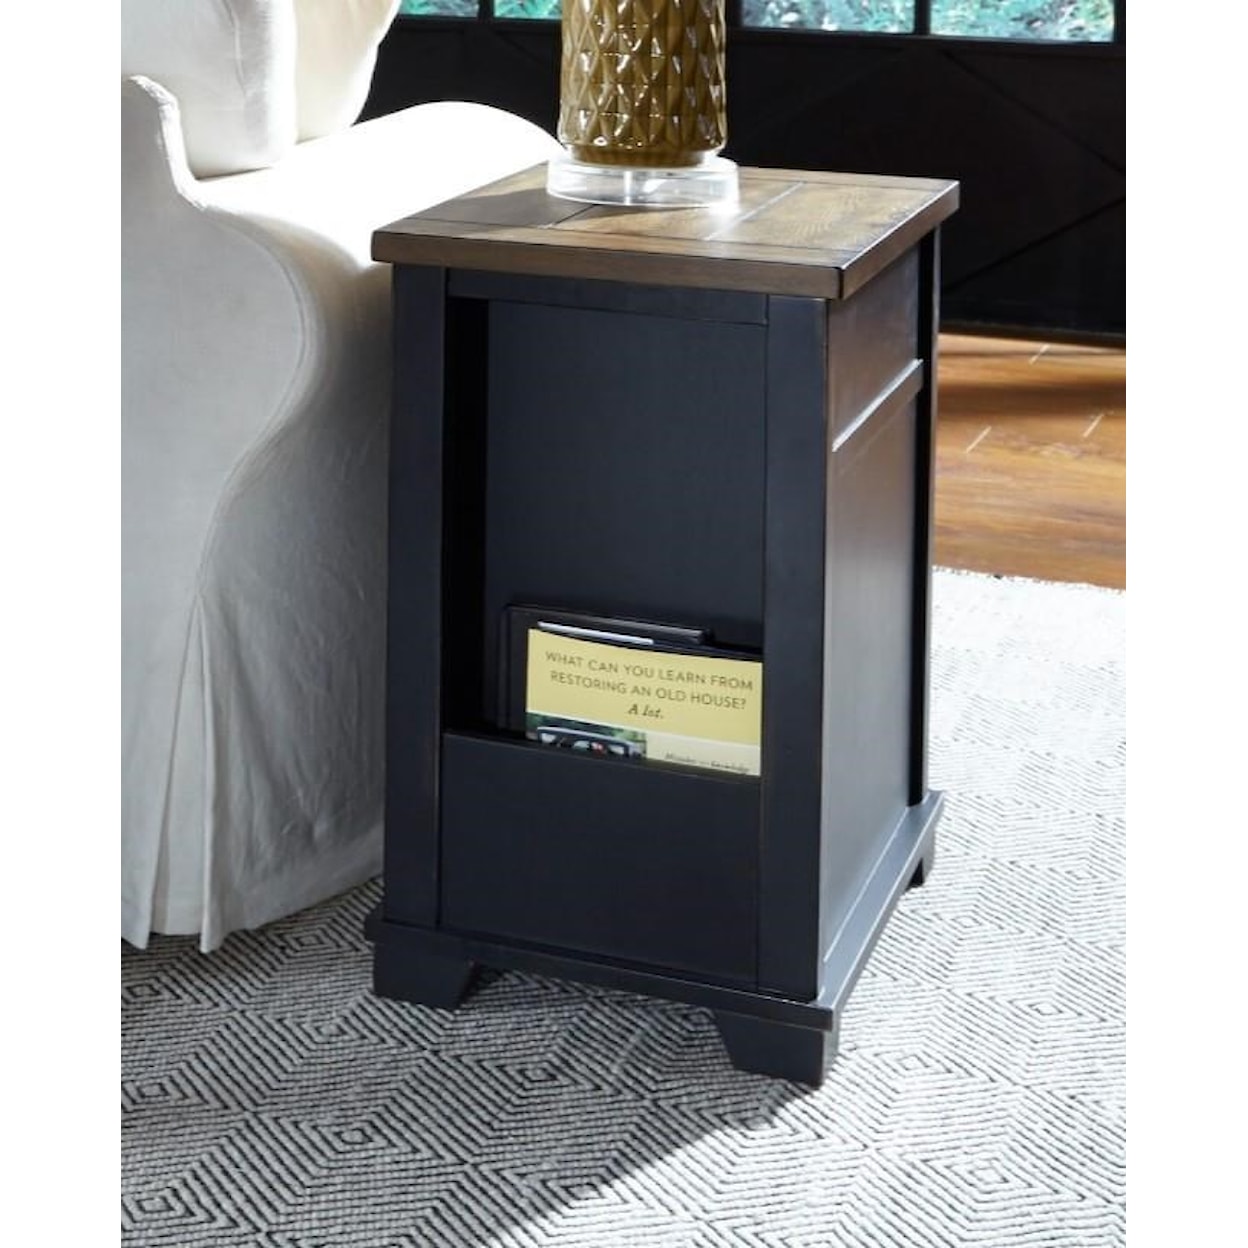 Null Furniture 2218 Chairside Cabinet